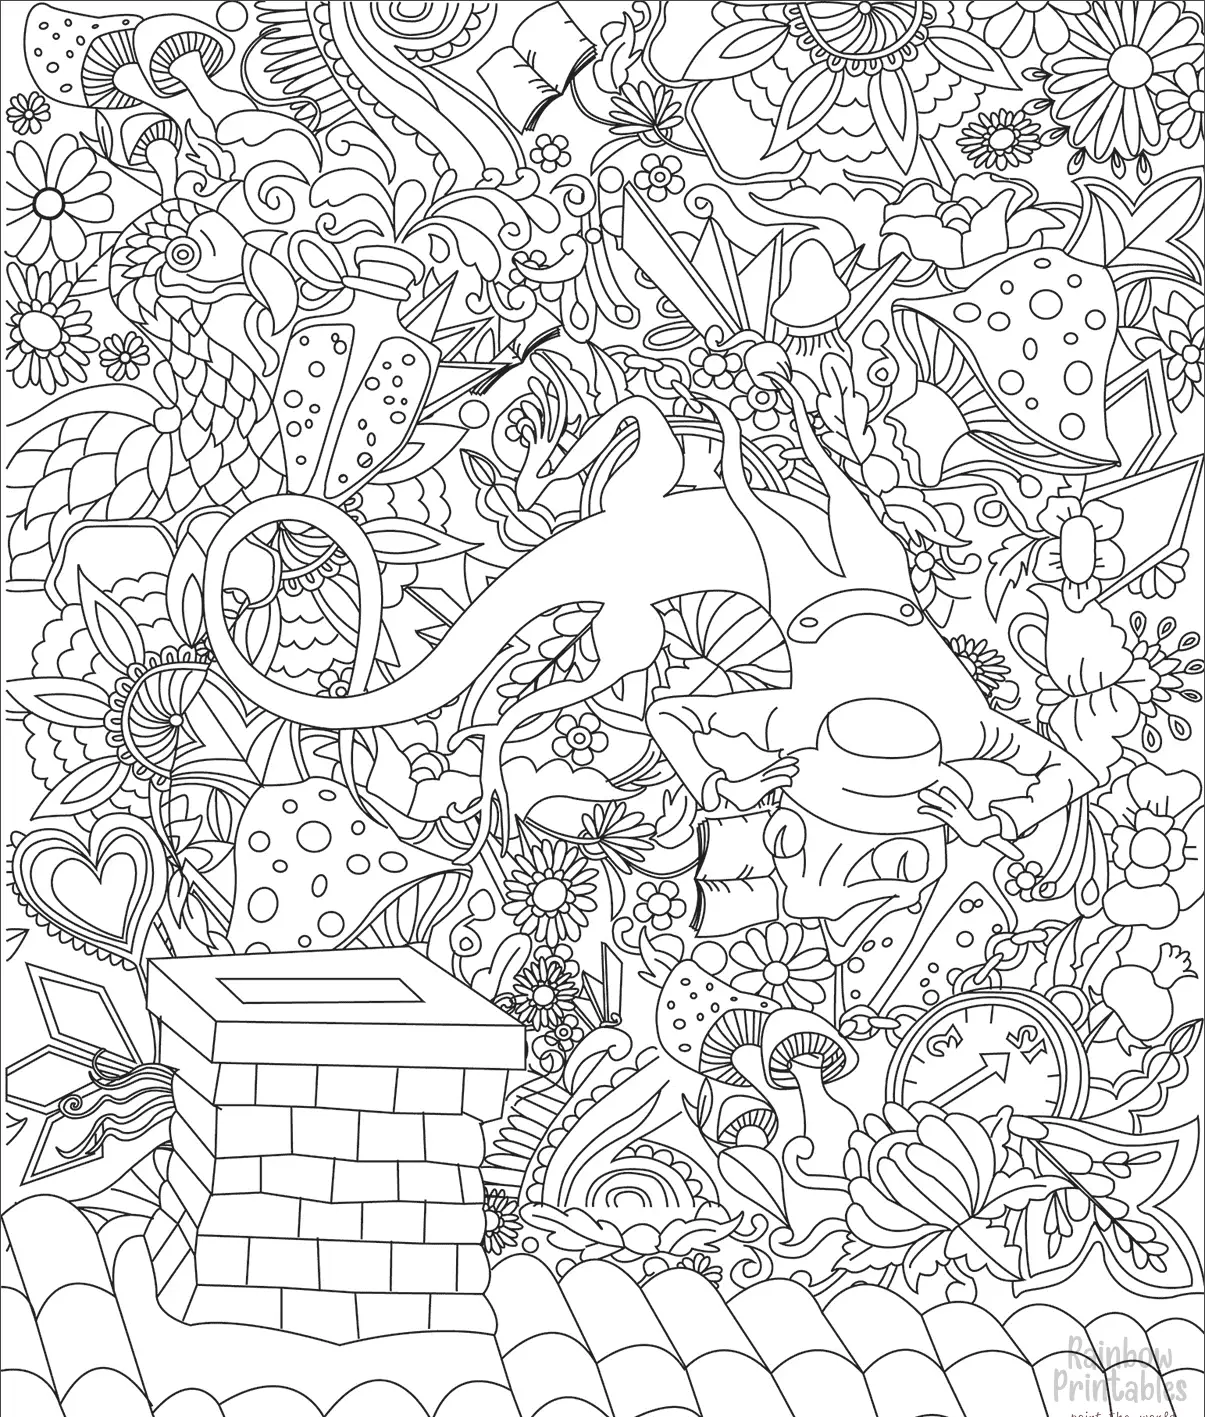 ABSTRACT Alice in Wonderland Lizard Chimney Beautiful Mandala Coloring Pages for Kids Adults Boredom Art Activities Line Art